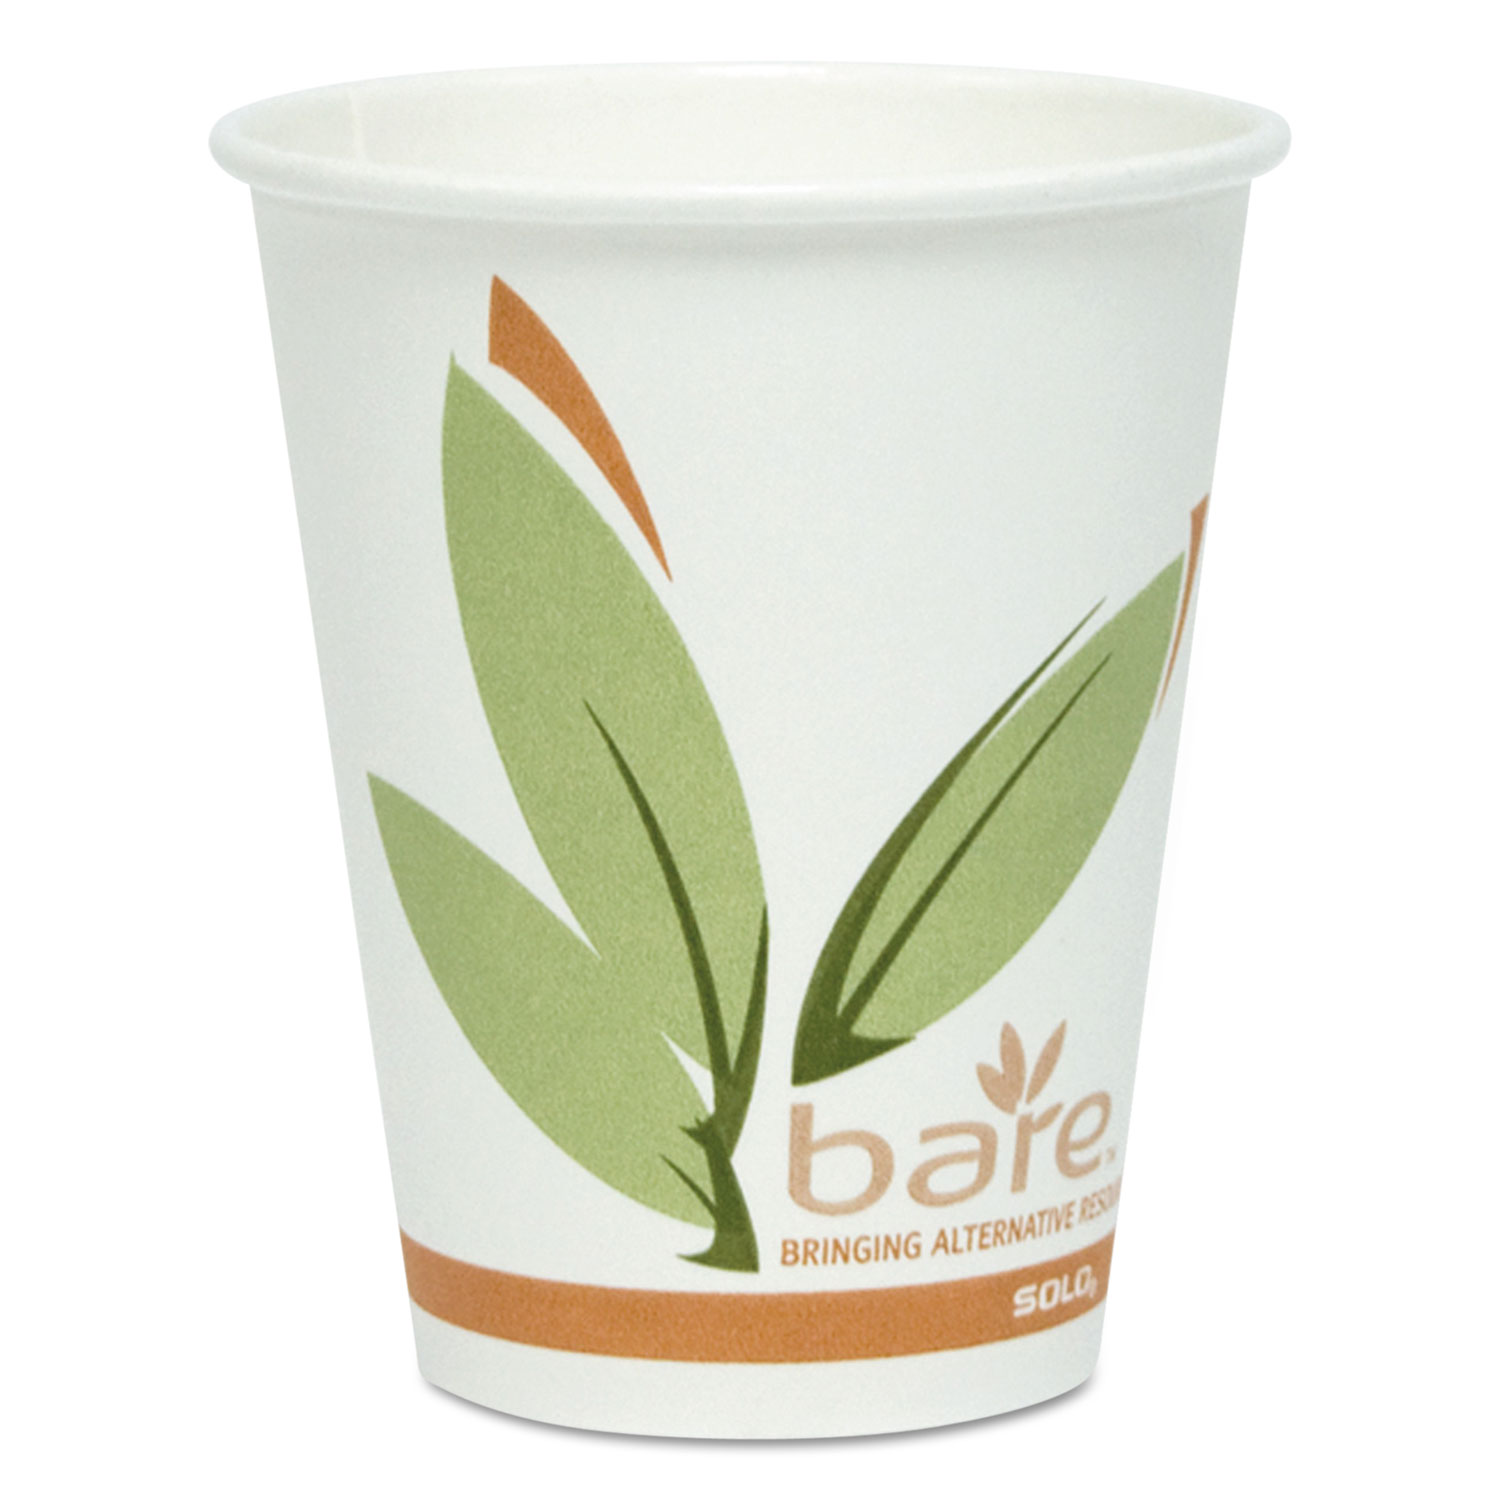  Dart OF8RC-J8484 Bare by Solo Eco-Forward Recycled Content PCF Paper Hot Cups, 8 oz, 500/Carton (SCCOF8RCJ8484) 